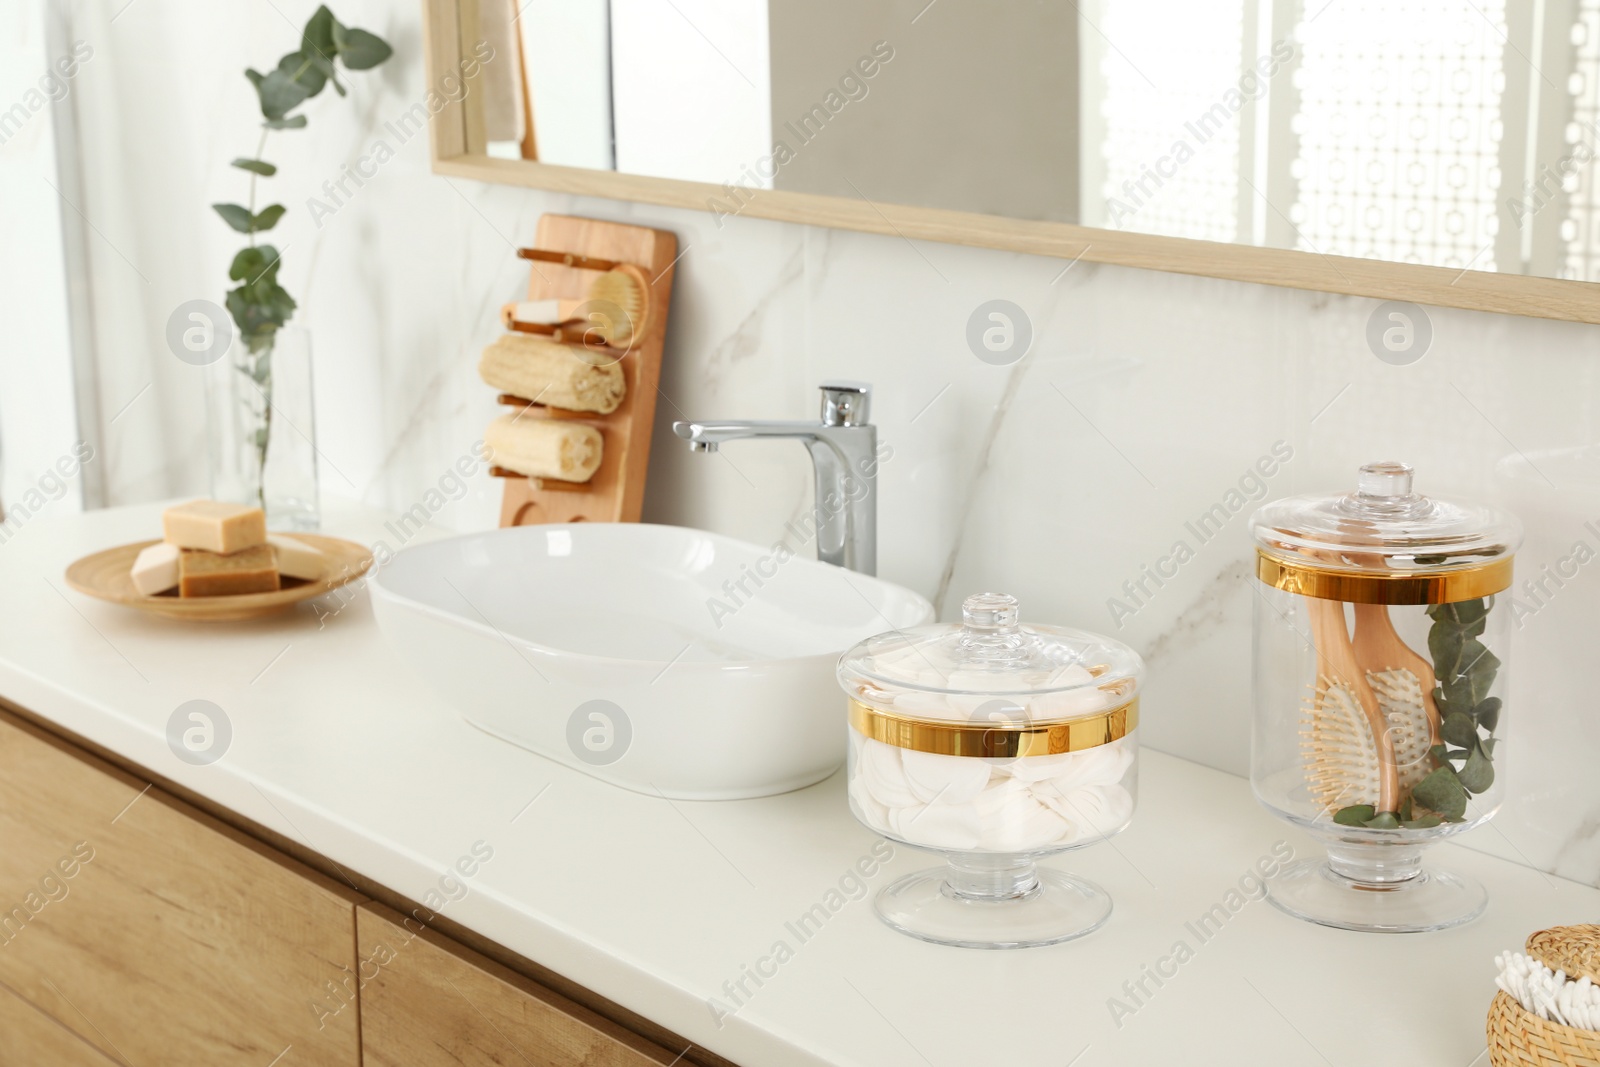 Photo of Jars with cotton pads and hairbrushes on bathroom countertop